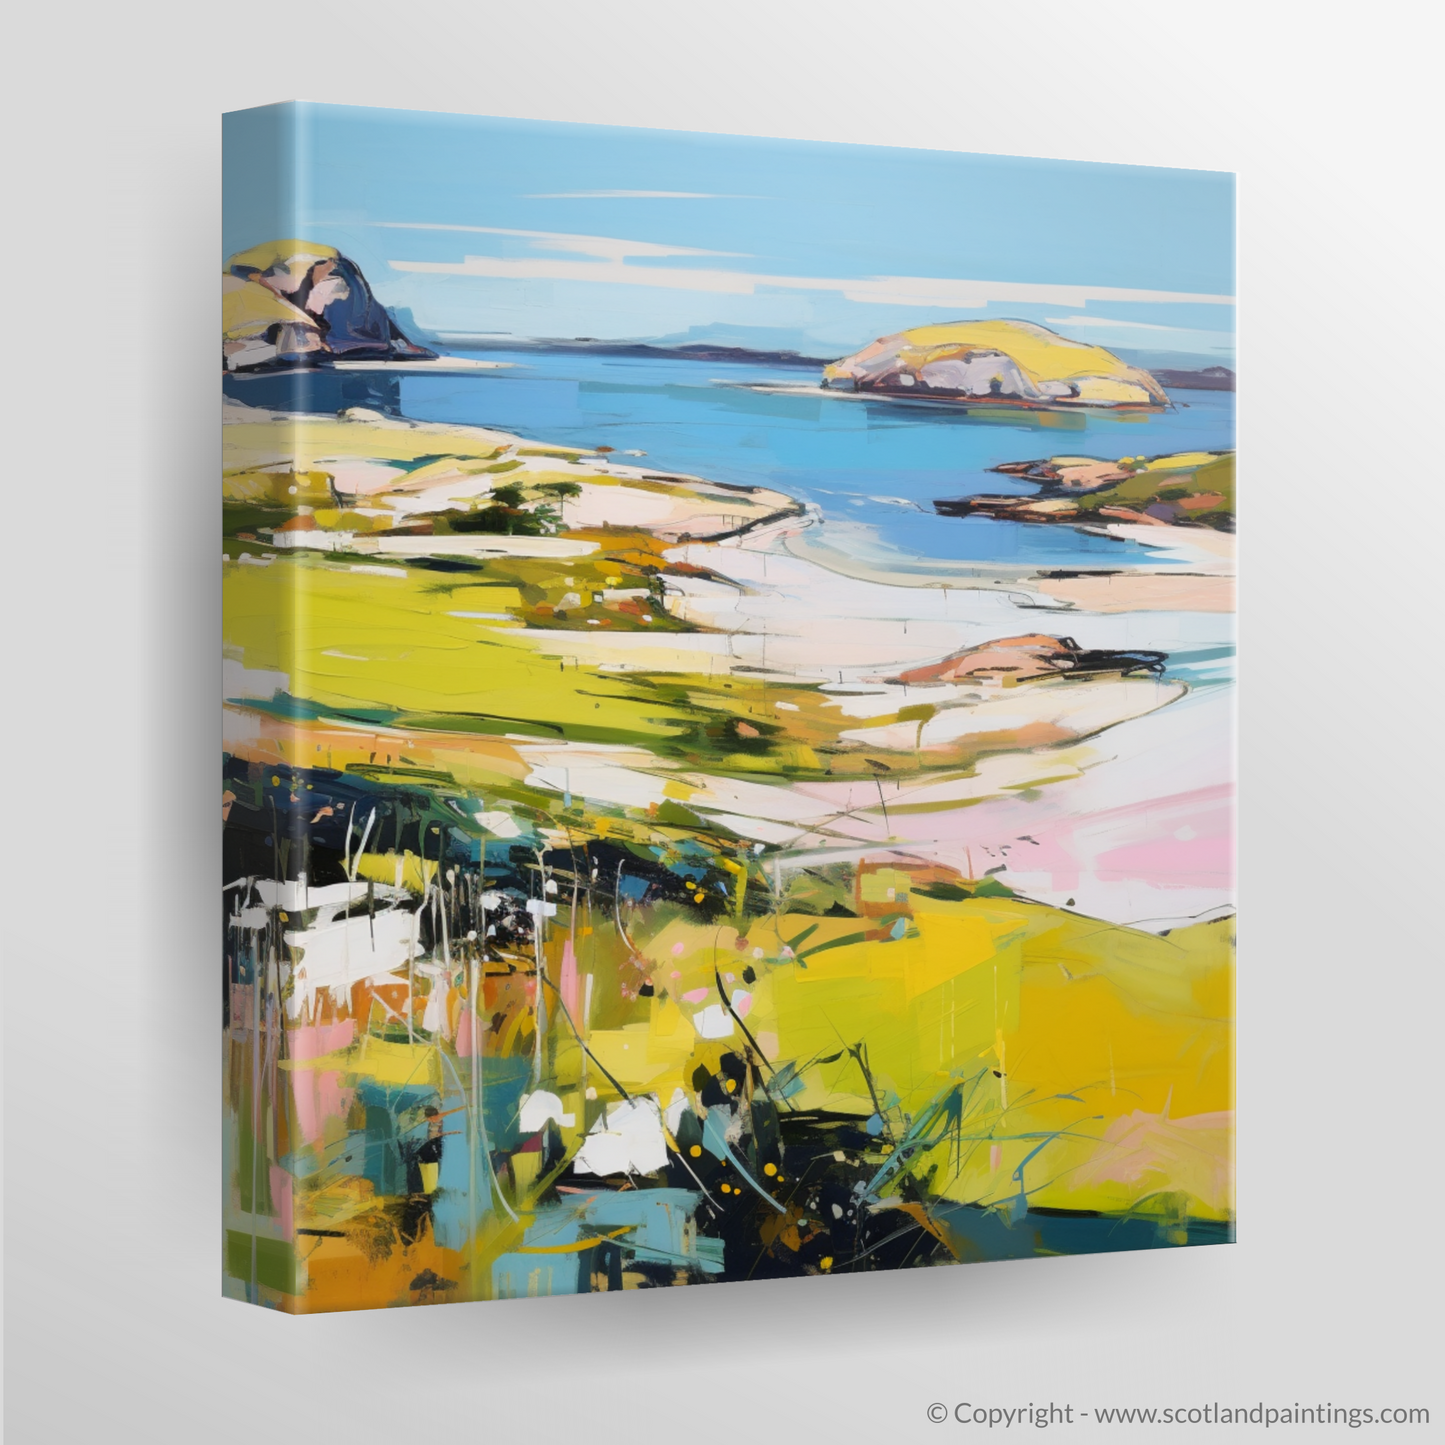 Painting and Art Print of Achmelvich Bay, Sutherland in summer. Achmelvich Bay Summer Symphony.